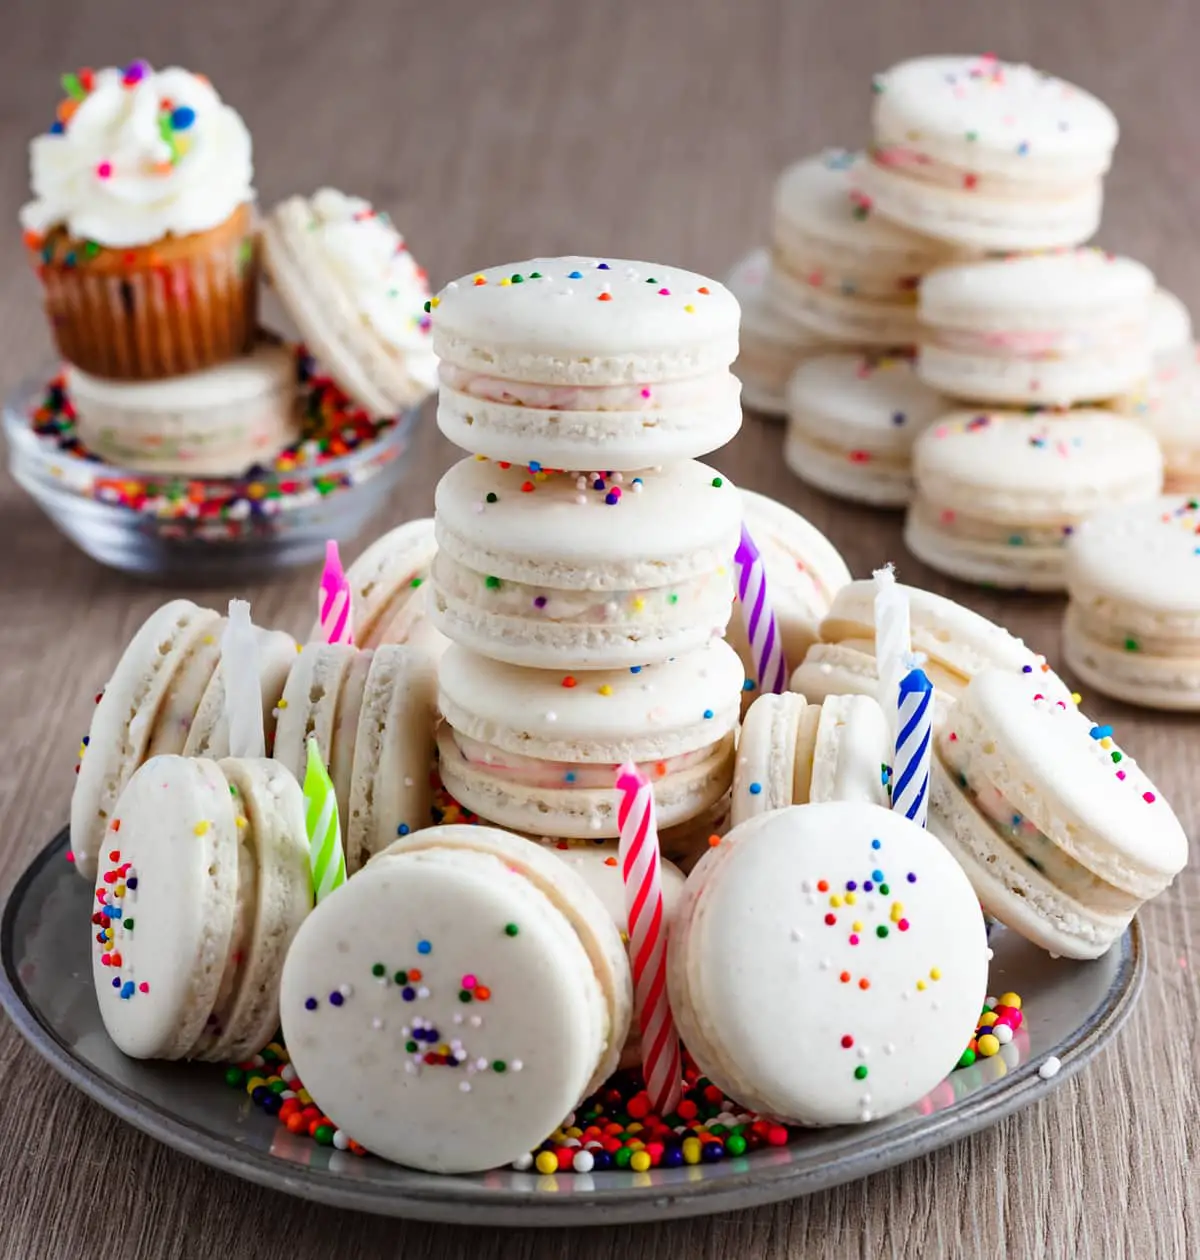 Cake macarons on a plate with candles and sprinkles